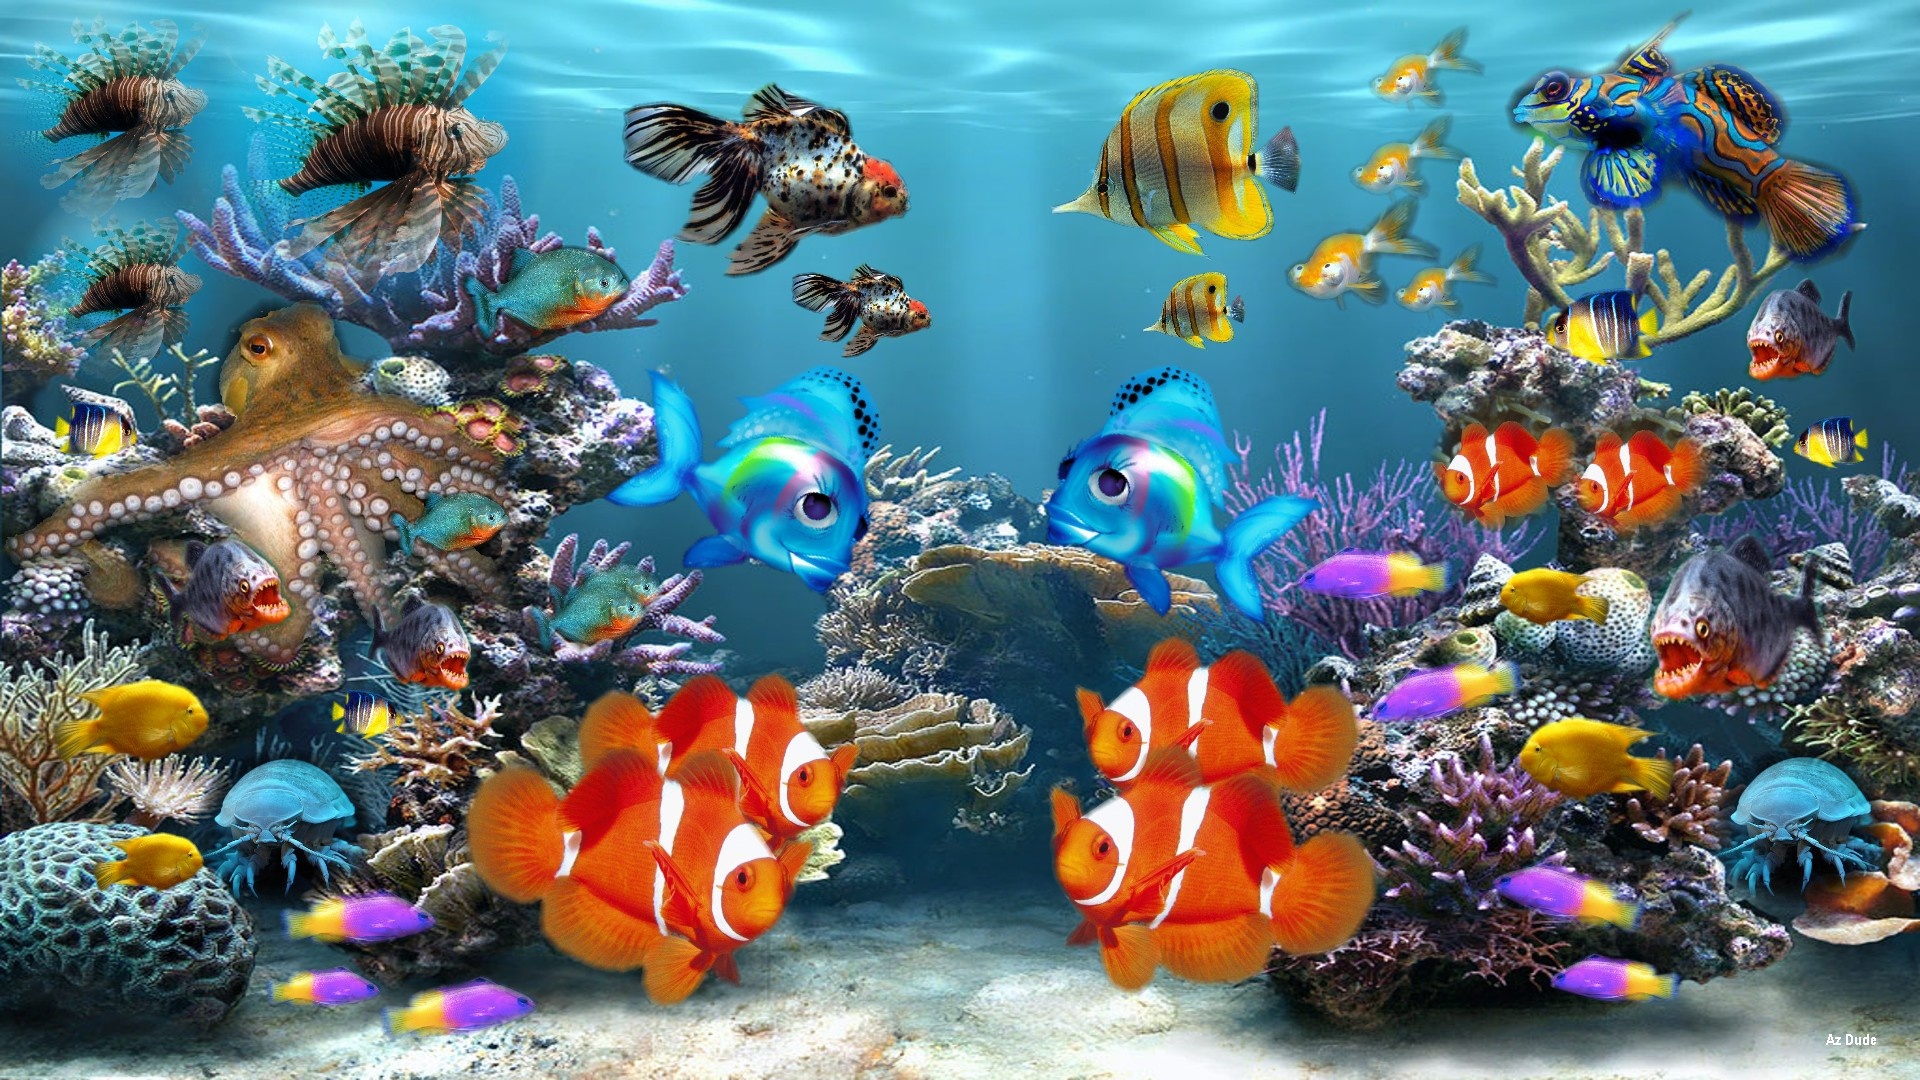 HD Fish Tank Wallpaper Desktop Animated Pictures Of Earth